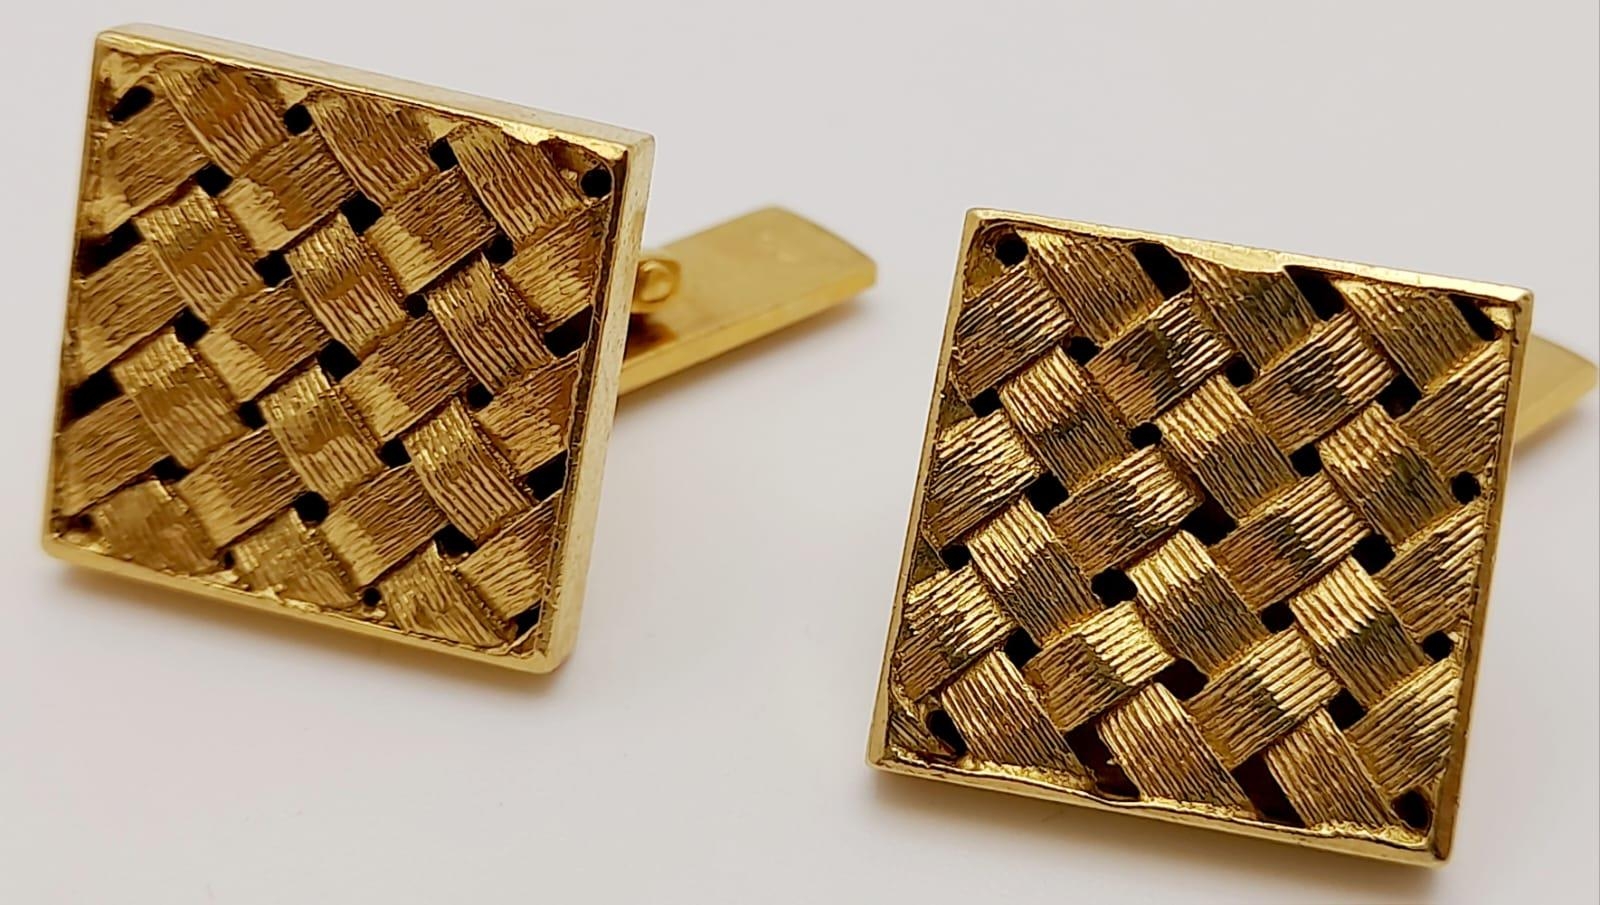 A PAIR OF 18K GOLD CARTIER STYLE CUFFLINKS WITH U.K. HALLMARK . 16.5gms - Image 2 of 6